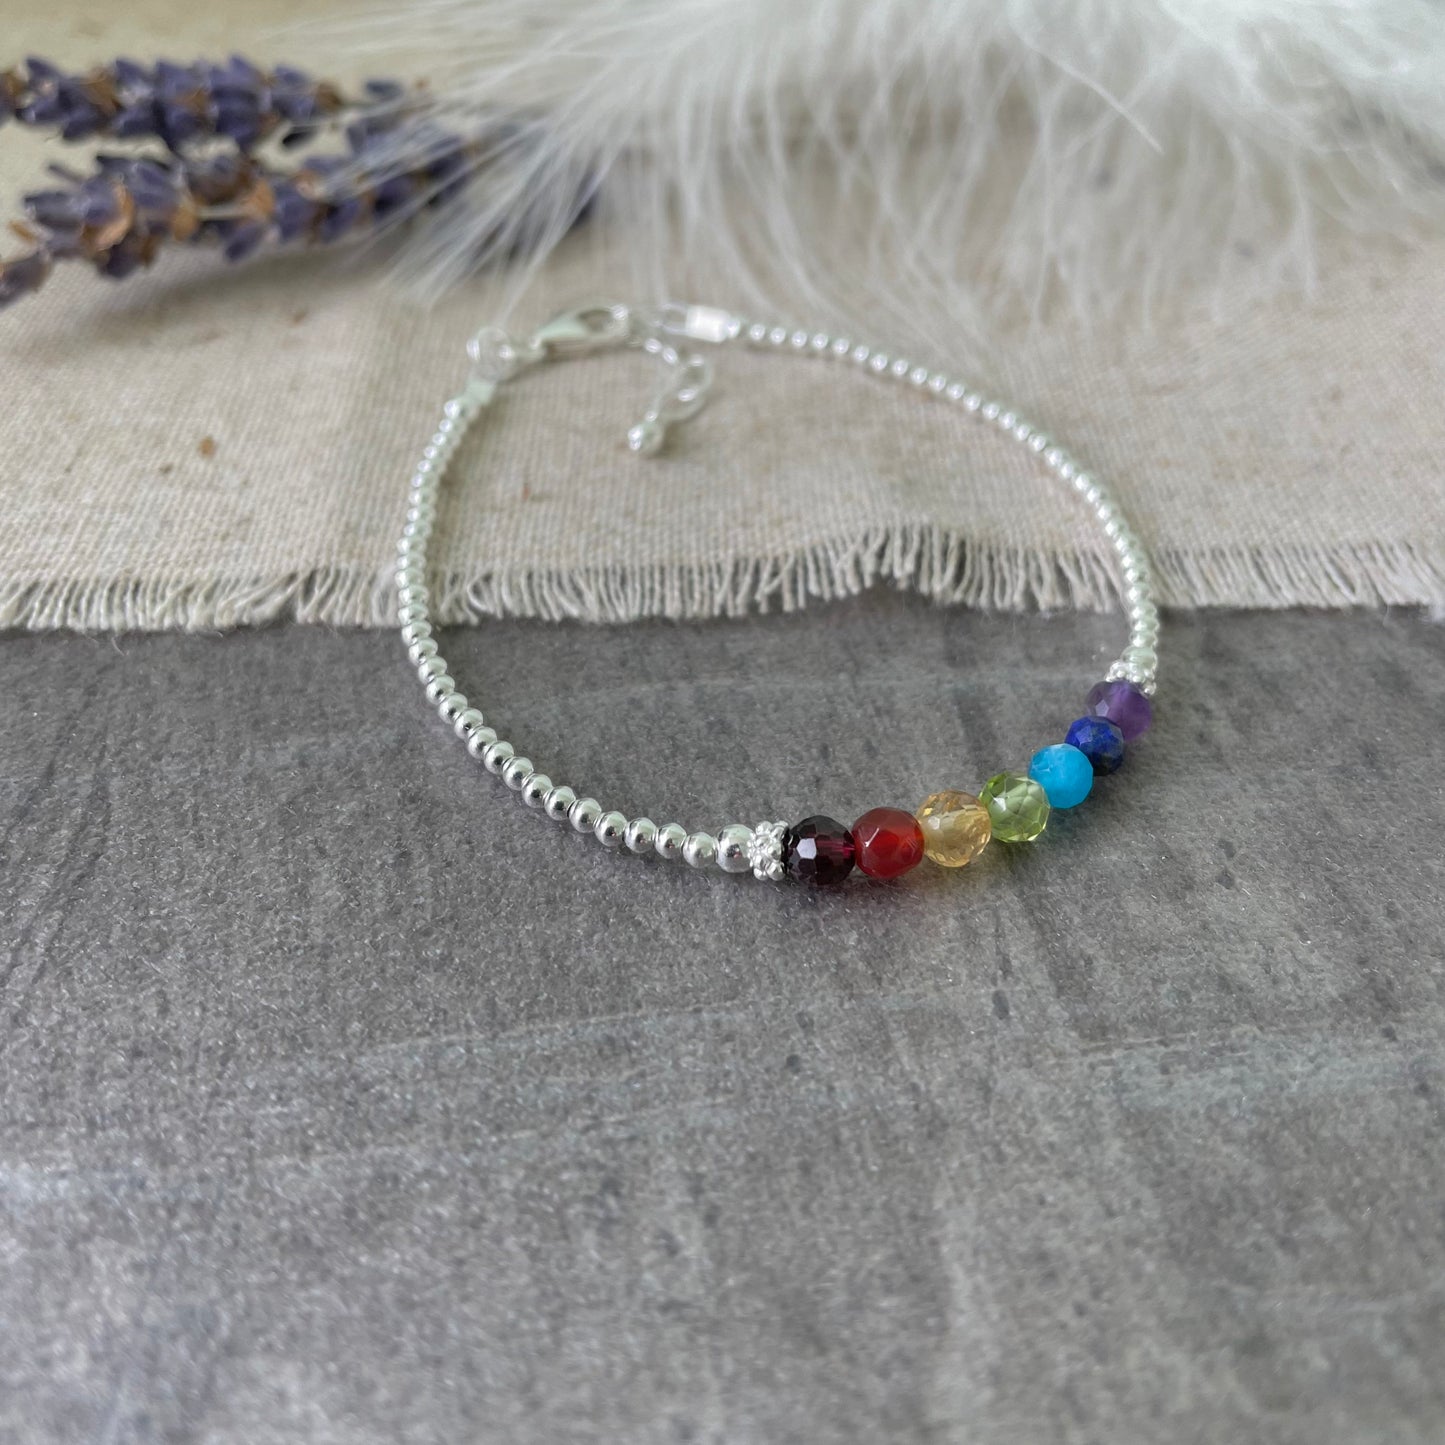 Chakra gemstone bracelet sterling silver with Rainbow Crystals Jewellery Gift for her